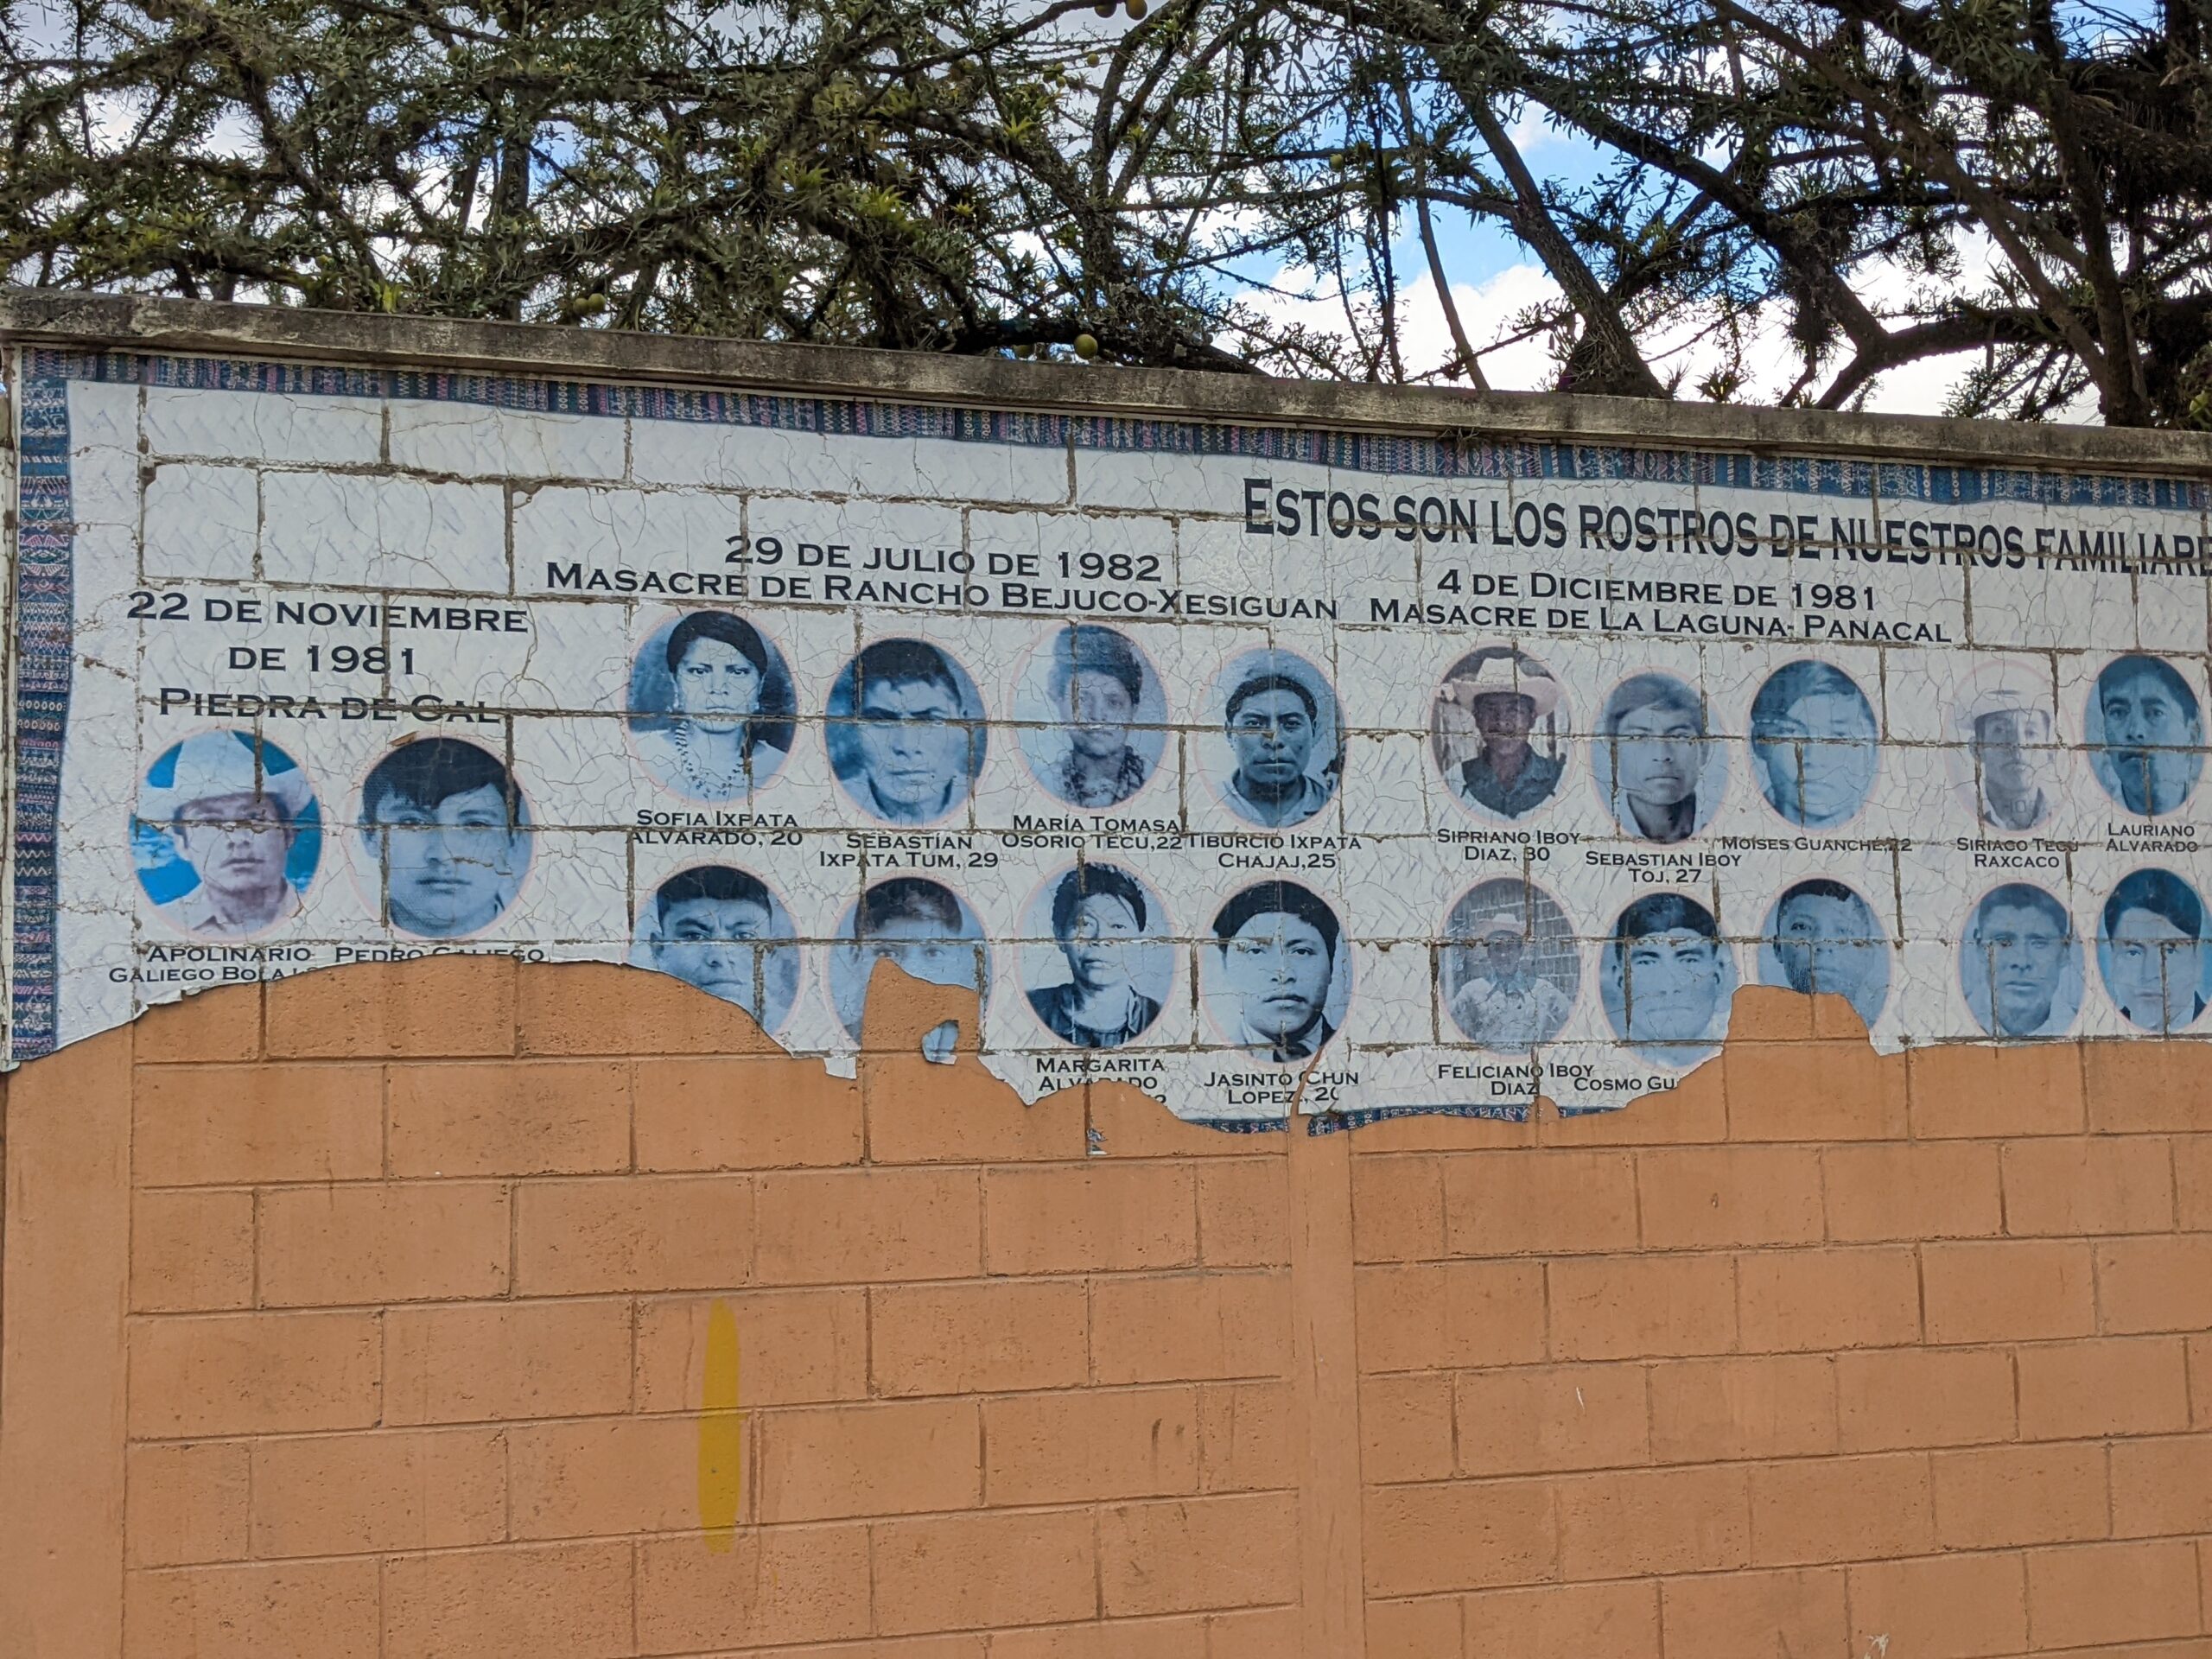 Mural with faces of Rancho Bejuco massacre victims.